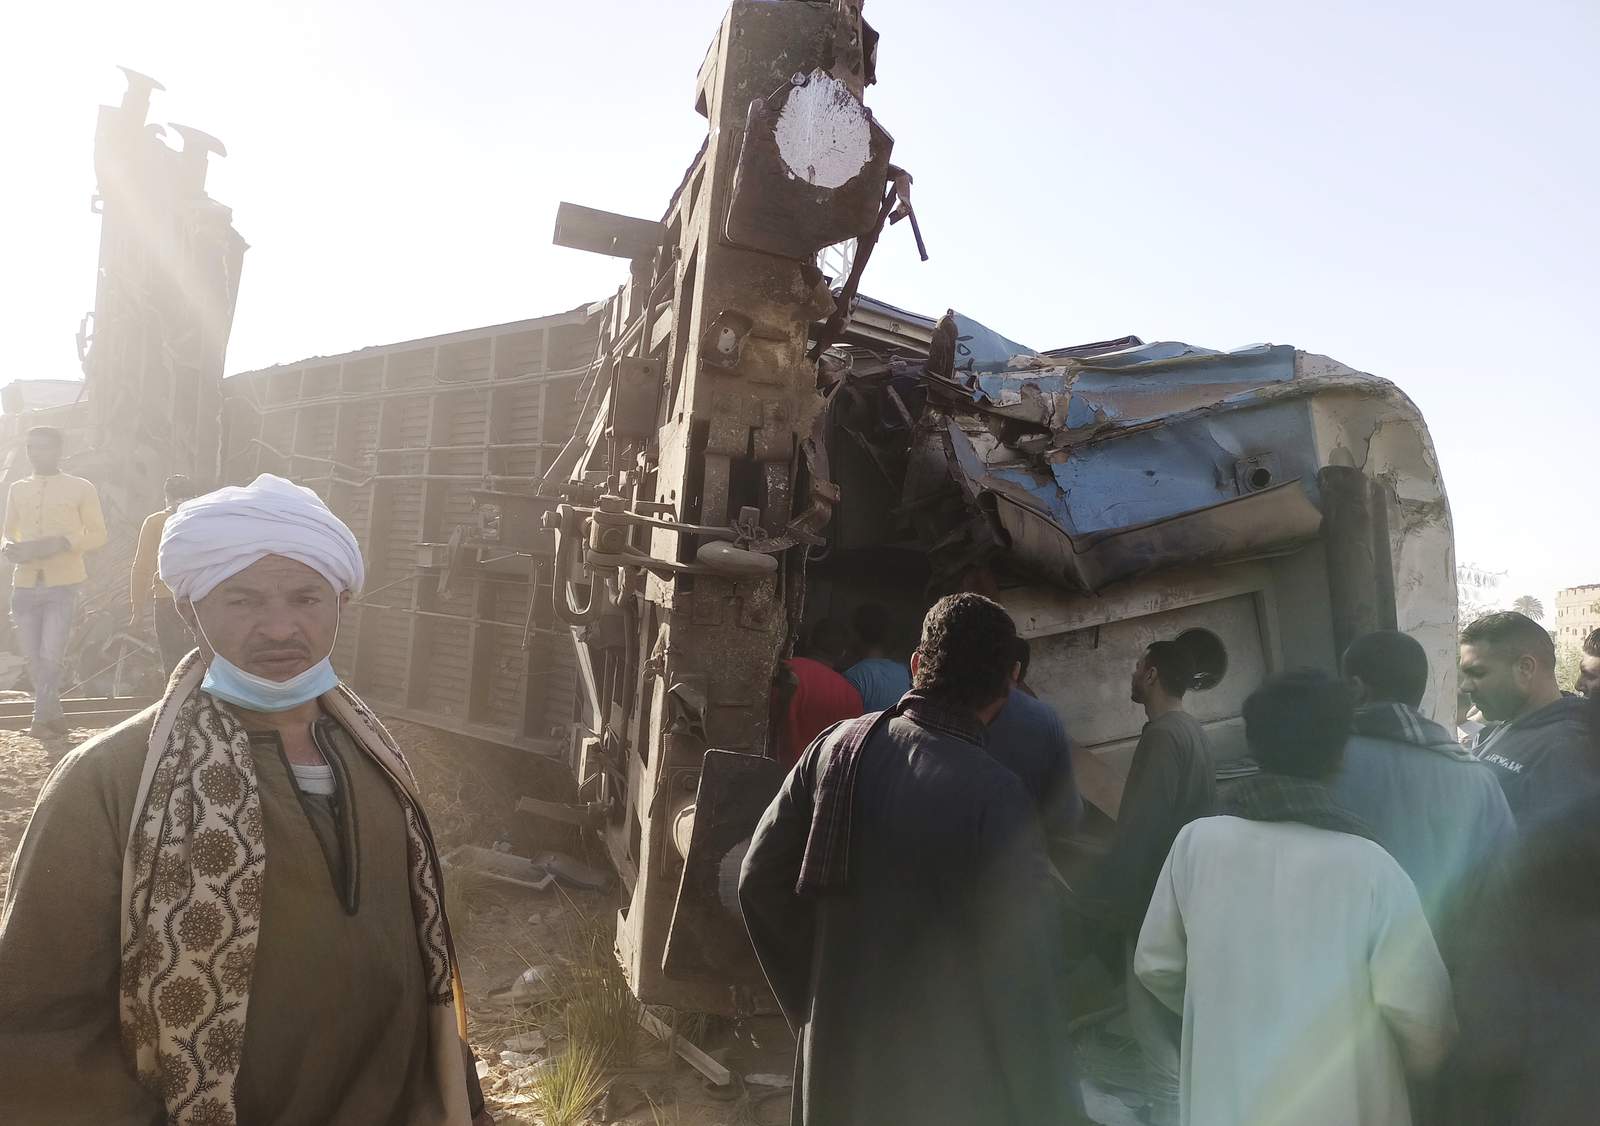 Trains crash in southern Egypt, killing at least 32